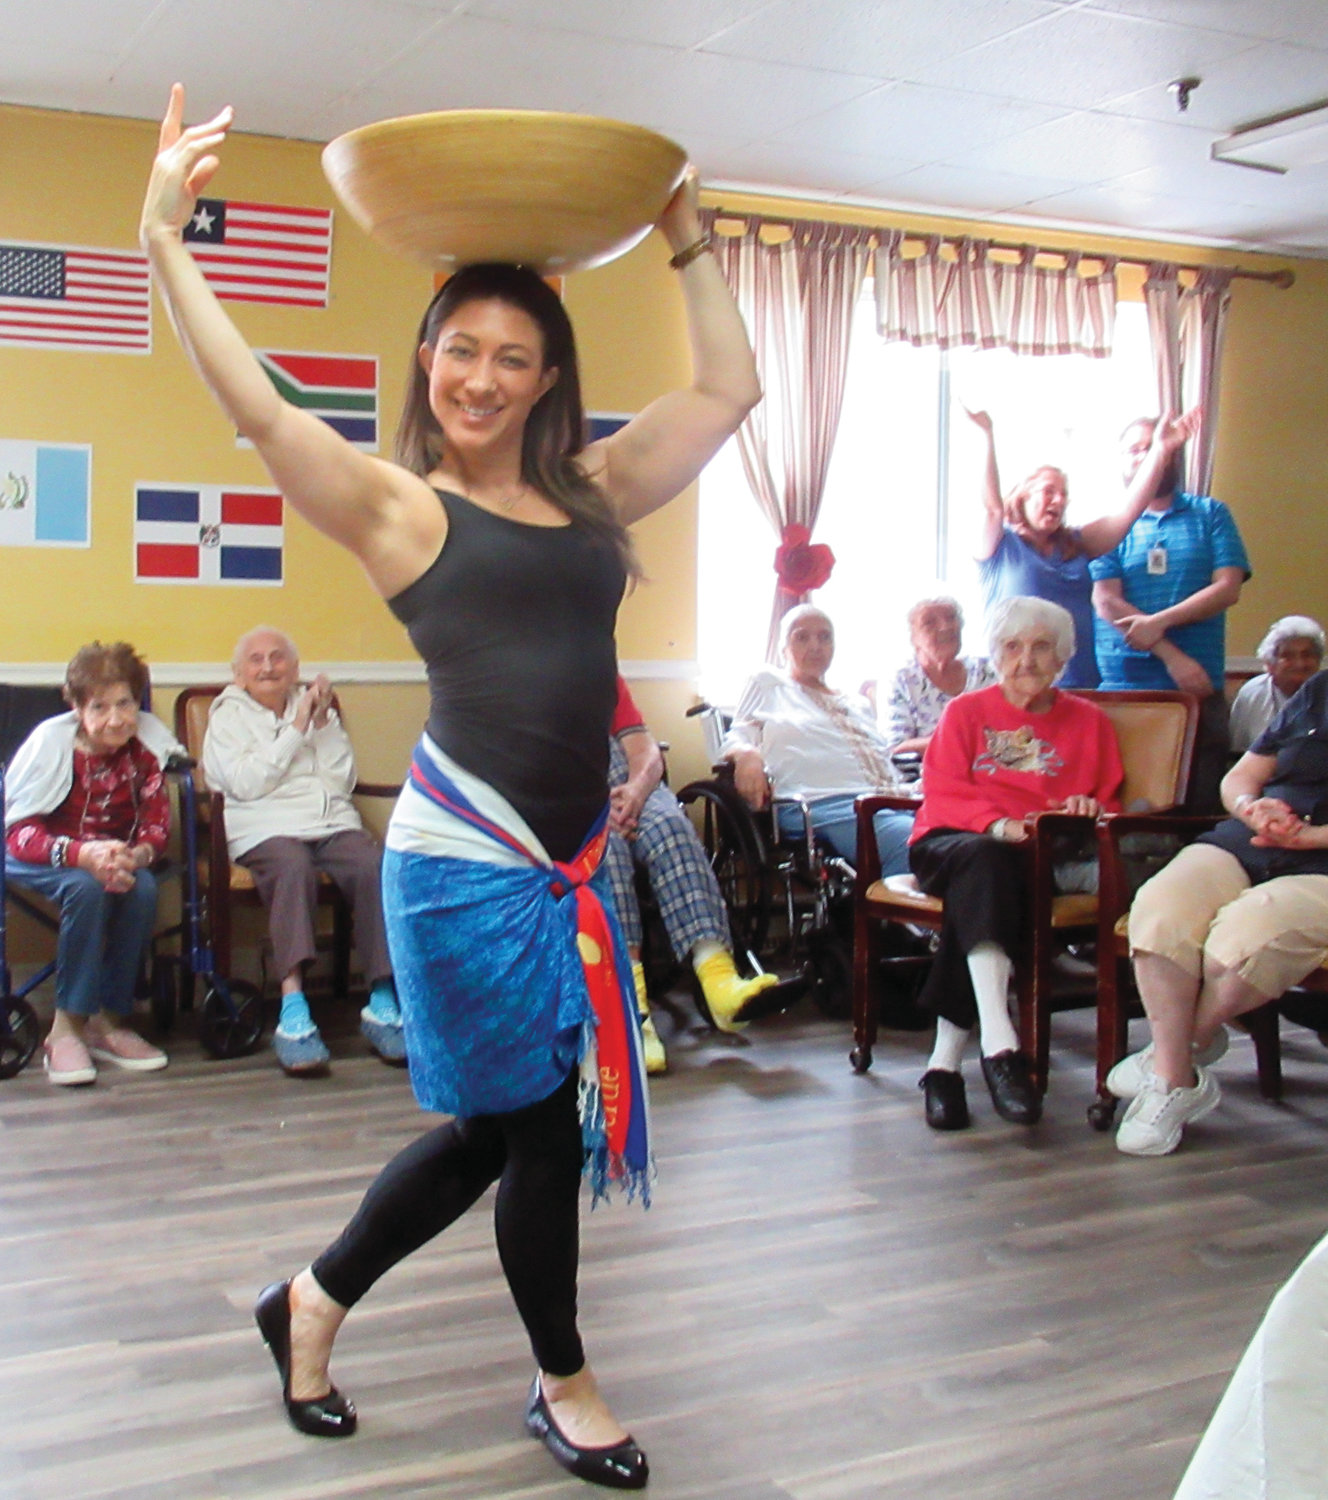 DYNAMIC DANCER: Kim Fontes, a physical therapist, finished first in the recent Briarcliffe Manor Latin Dance Off.